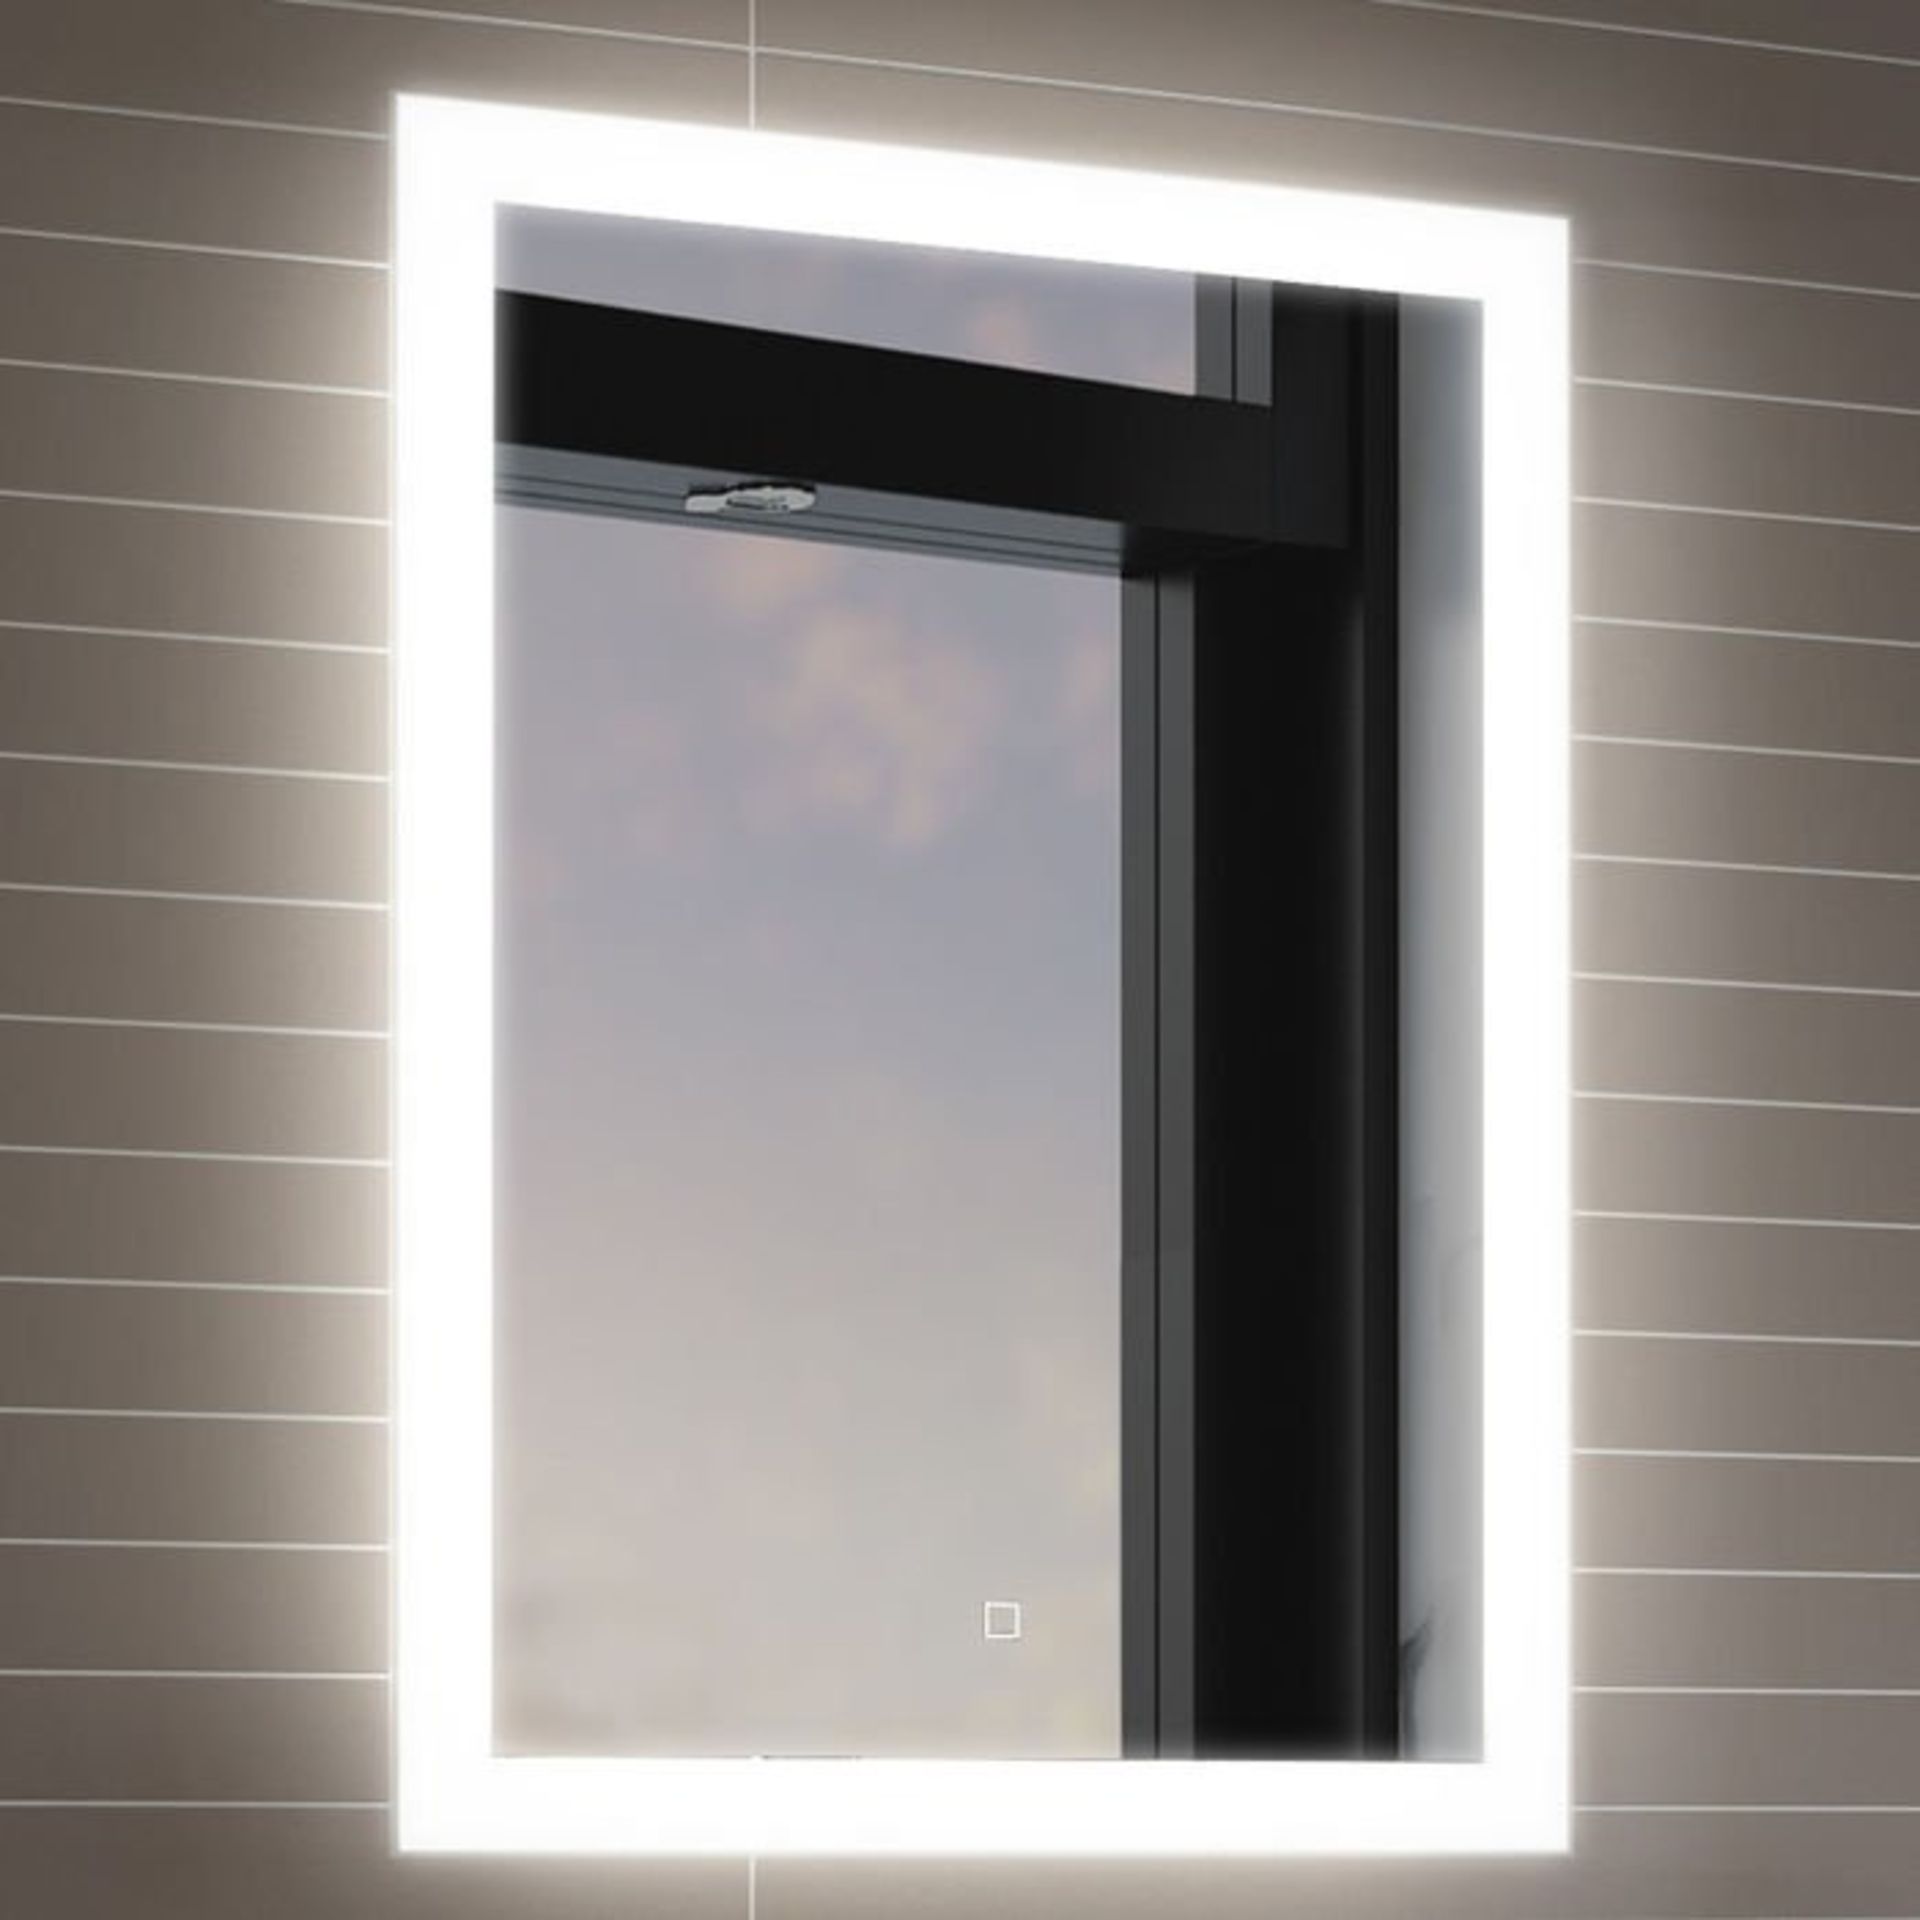 (G208) 700x500mm Orion Illuminated LED Mirror - Switch Control. RRP £349.99. Energy efficient LED